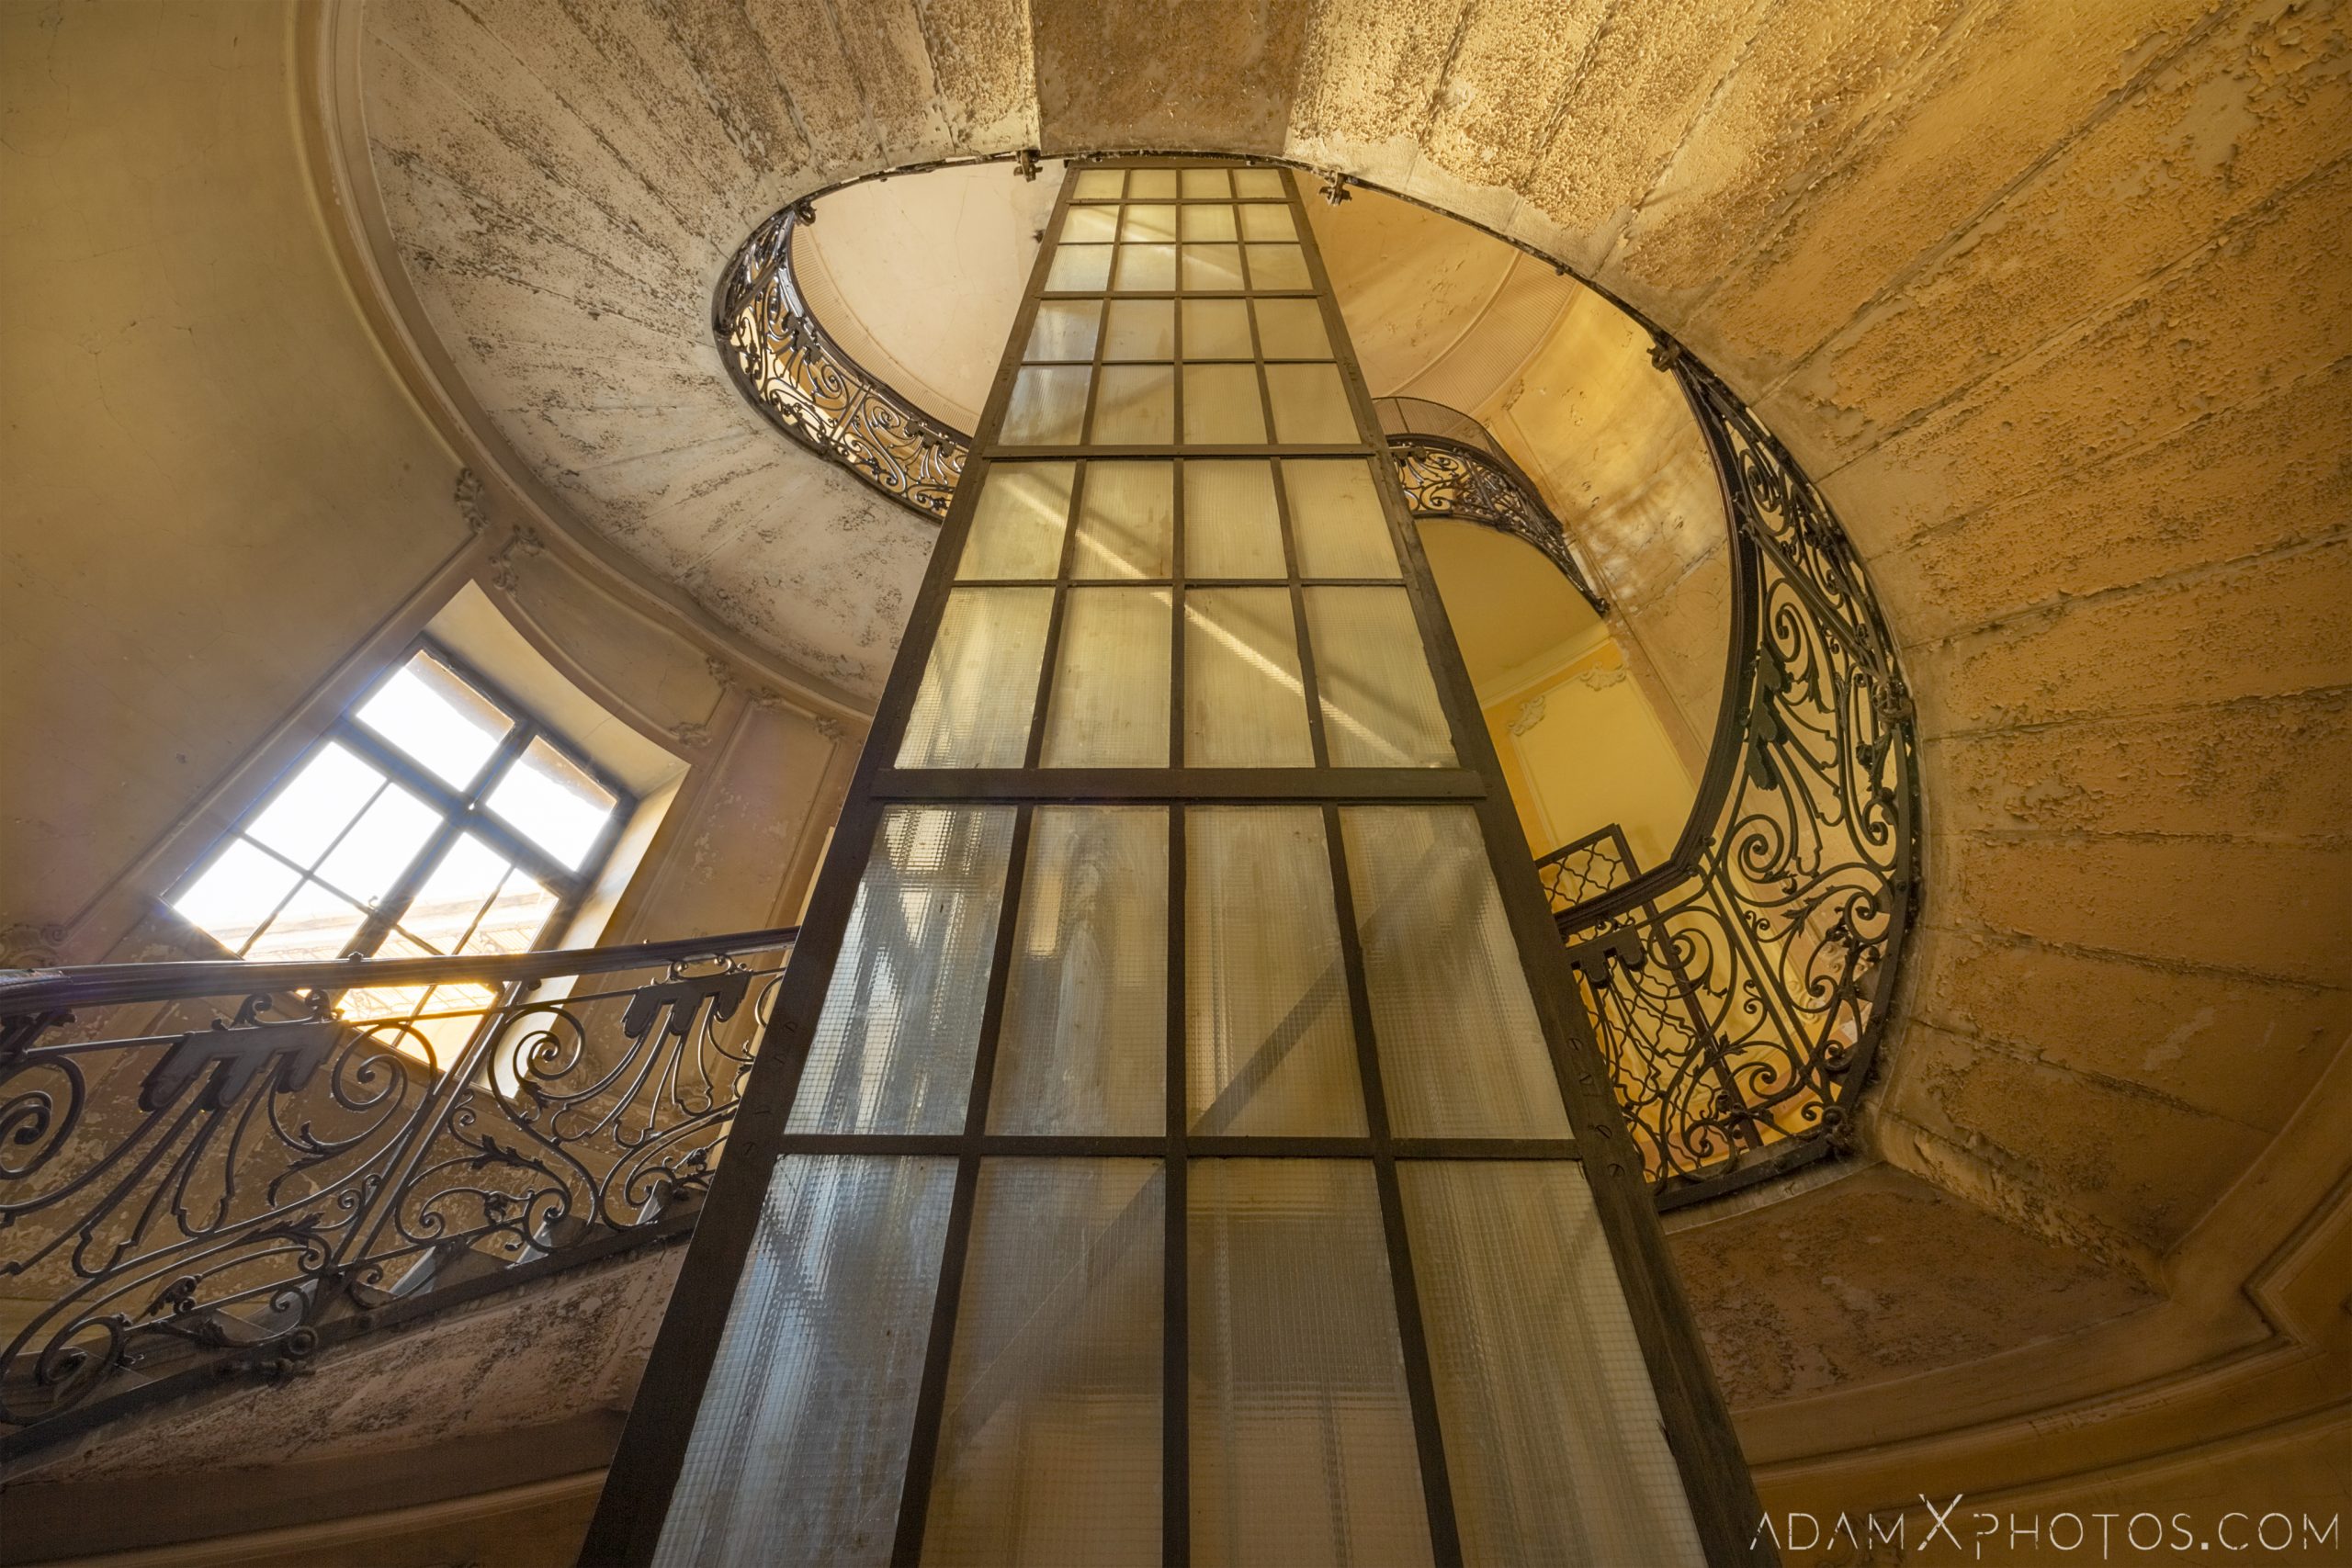 spiral staircase looking up lift Adria Palace Budapest Hungary Adam X Urbex Urban Exploration Access 2018 Blade Runner 2049 Abandoned decay ruins lost forgotten derelict location creepy haunting eerie security ornate grand neo baroque